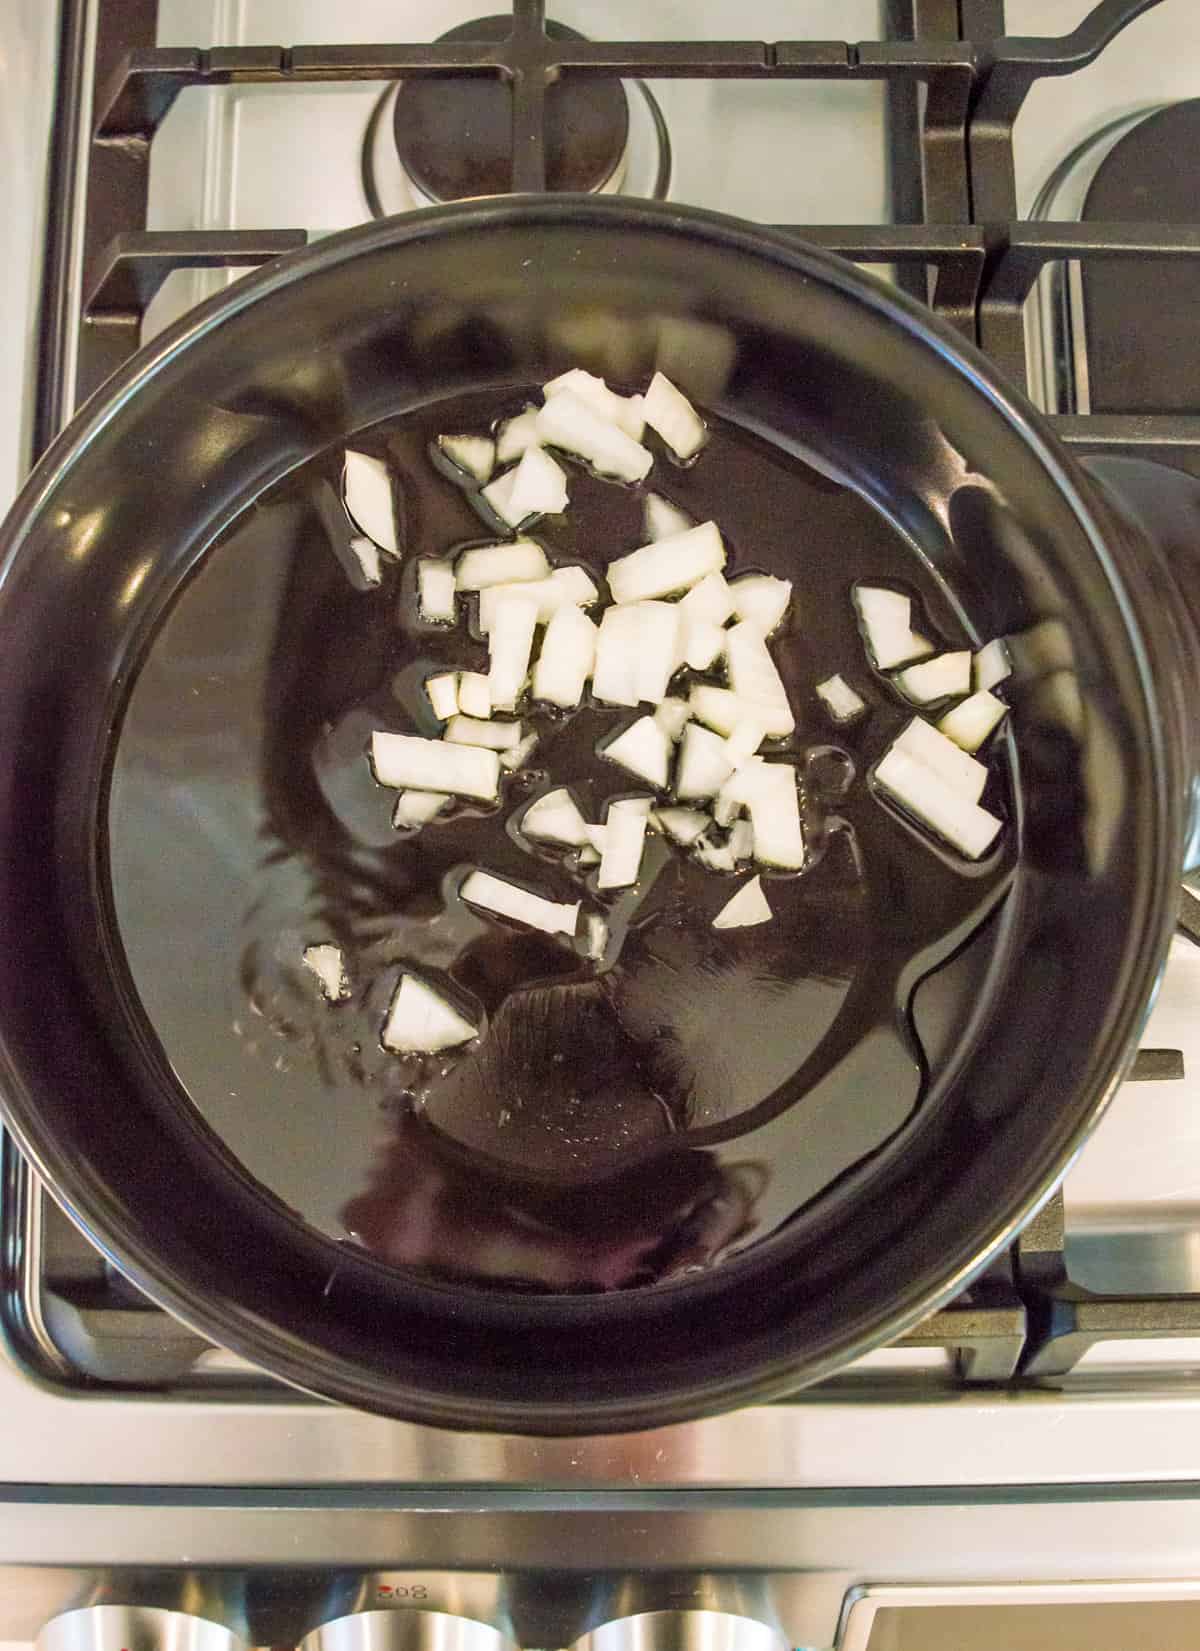 A pan filled with melted oil and chopped onions on the stovetop.